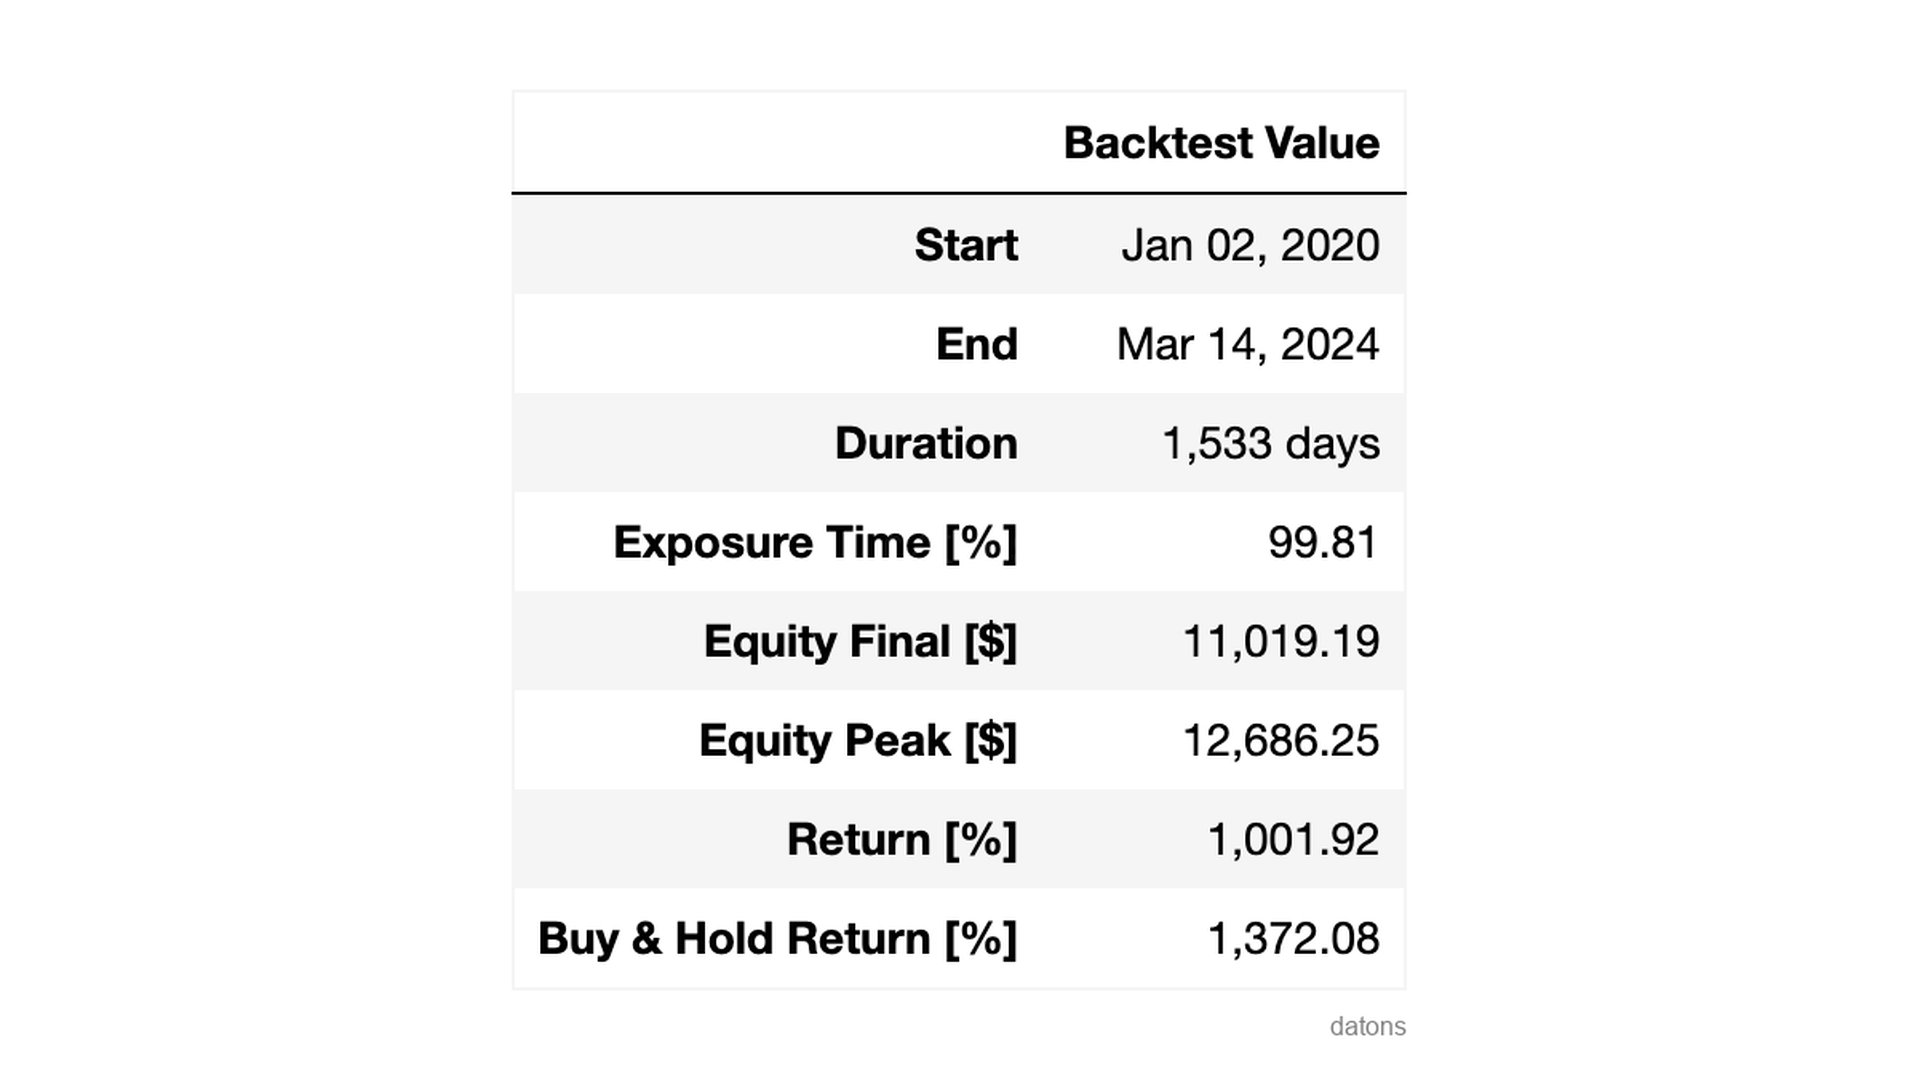 Summary of the results of a backtest applying a Machine Learning-based investment strategy, highlighting the final equity and total return obtained during the test period.